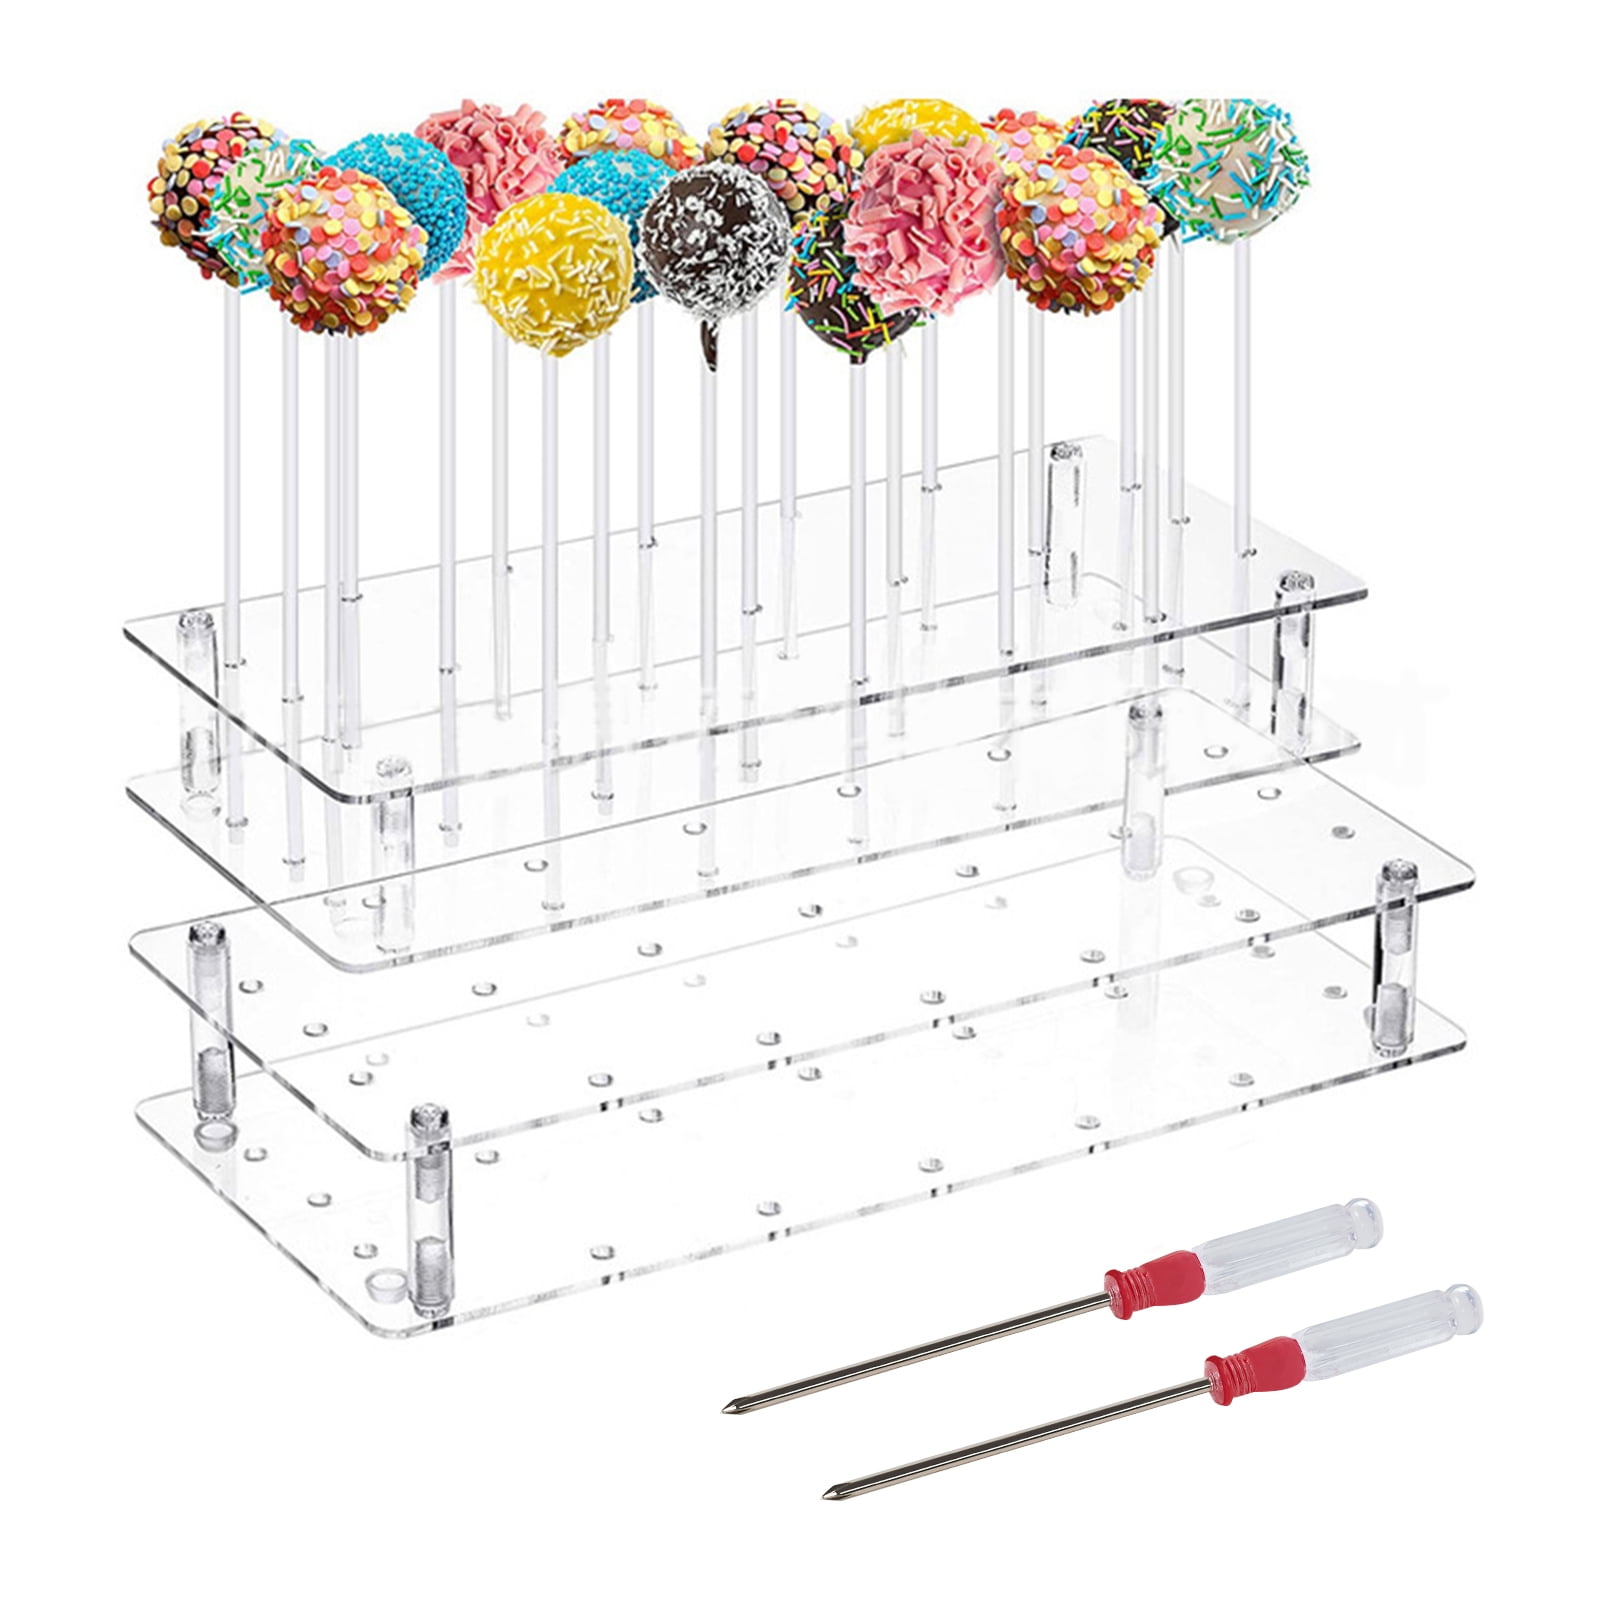 10pcs Cake Pop Packaging,White Cake Pop Holder Cake Pop Stand 18 Holes  （8.6*6*11.8）With Clear Window Displaying Small Cake Packaging 24 Yards  Silver Ribbons Decoration Making Lollipops - Walmart.com